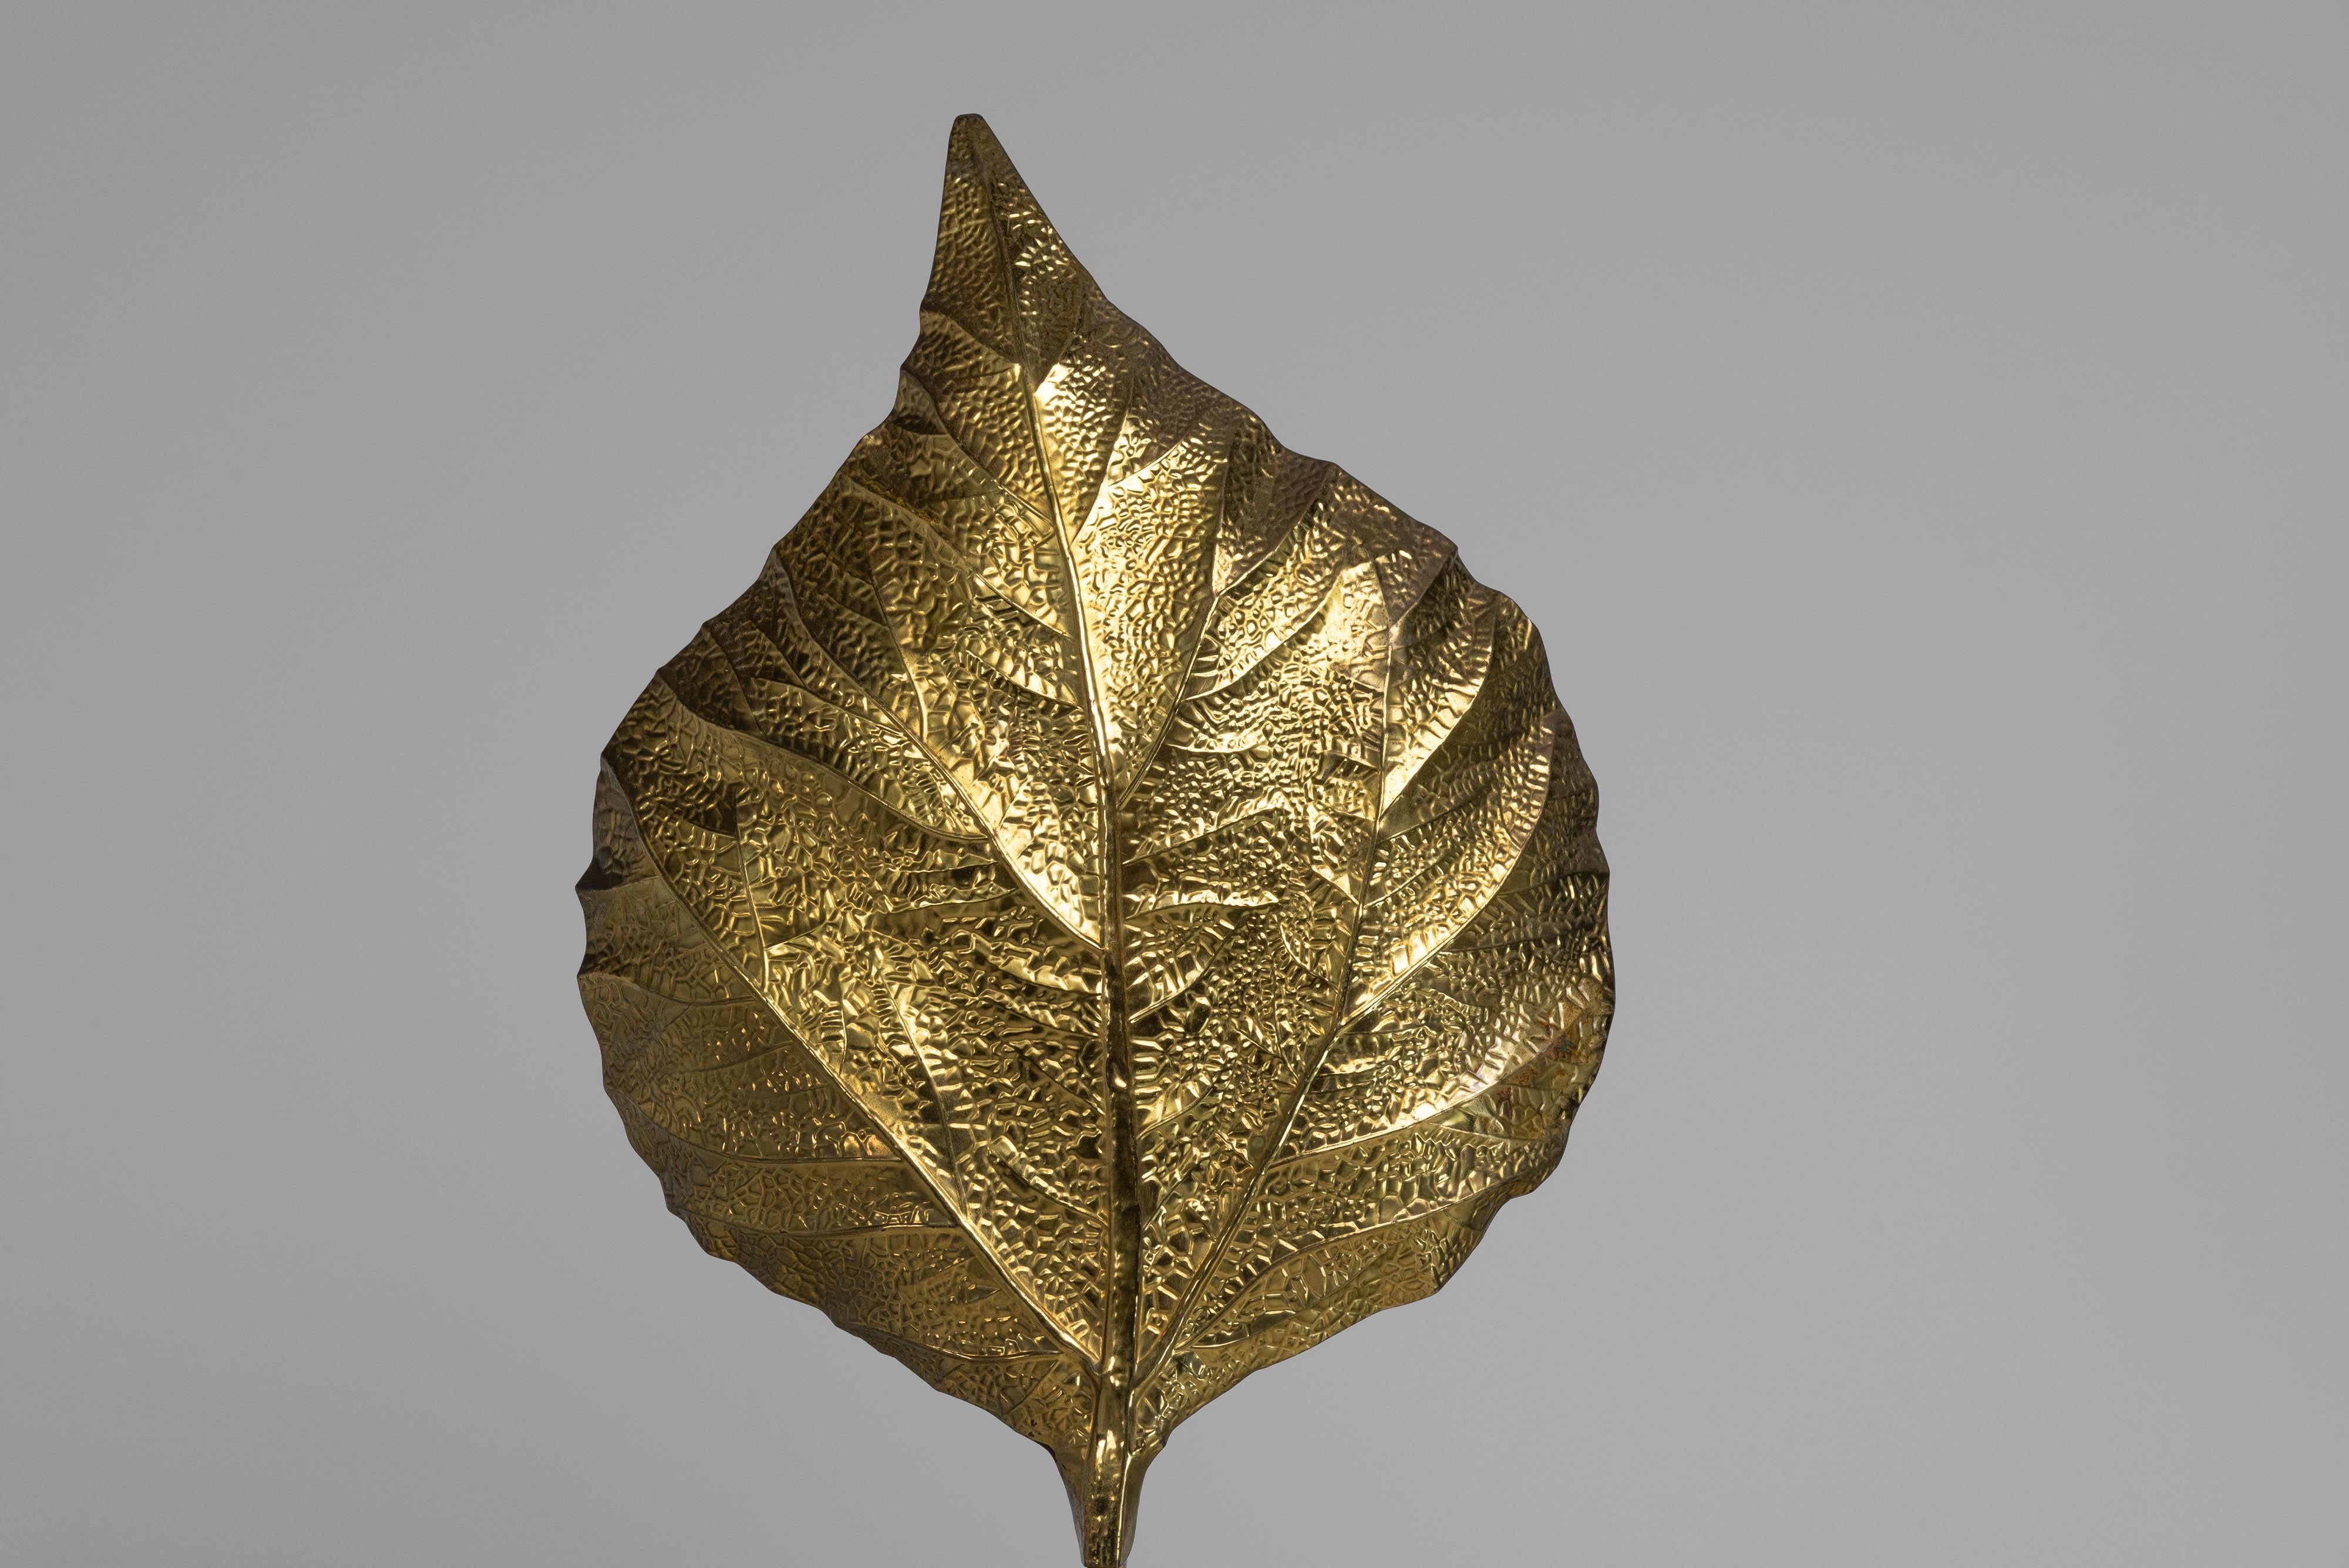 Elegant oversized floor lamp in the shape of a rhubarb leaf. Designed by Carlo Gorgi and manufactured by Bottega Gadda, Italy 1971. This lamp is made of solid brass, and its original patina gives it a special character. The design includes an